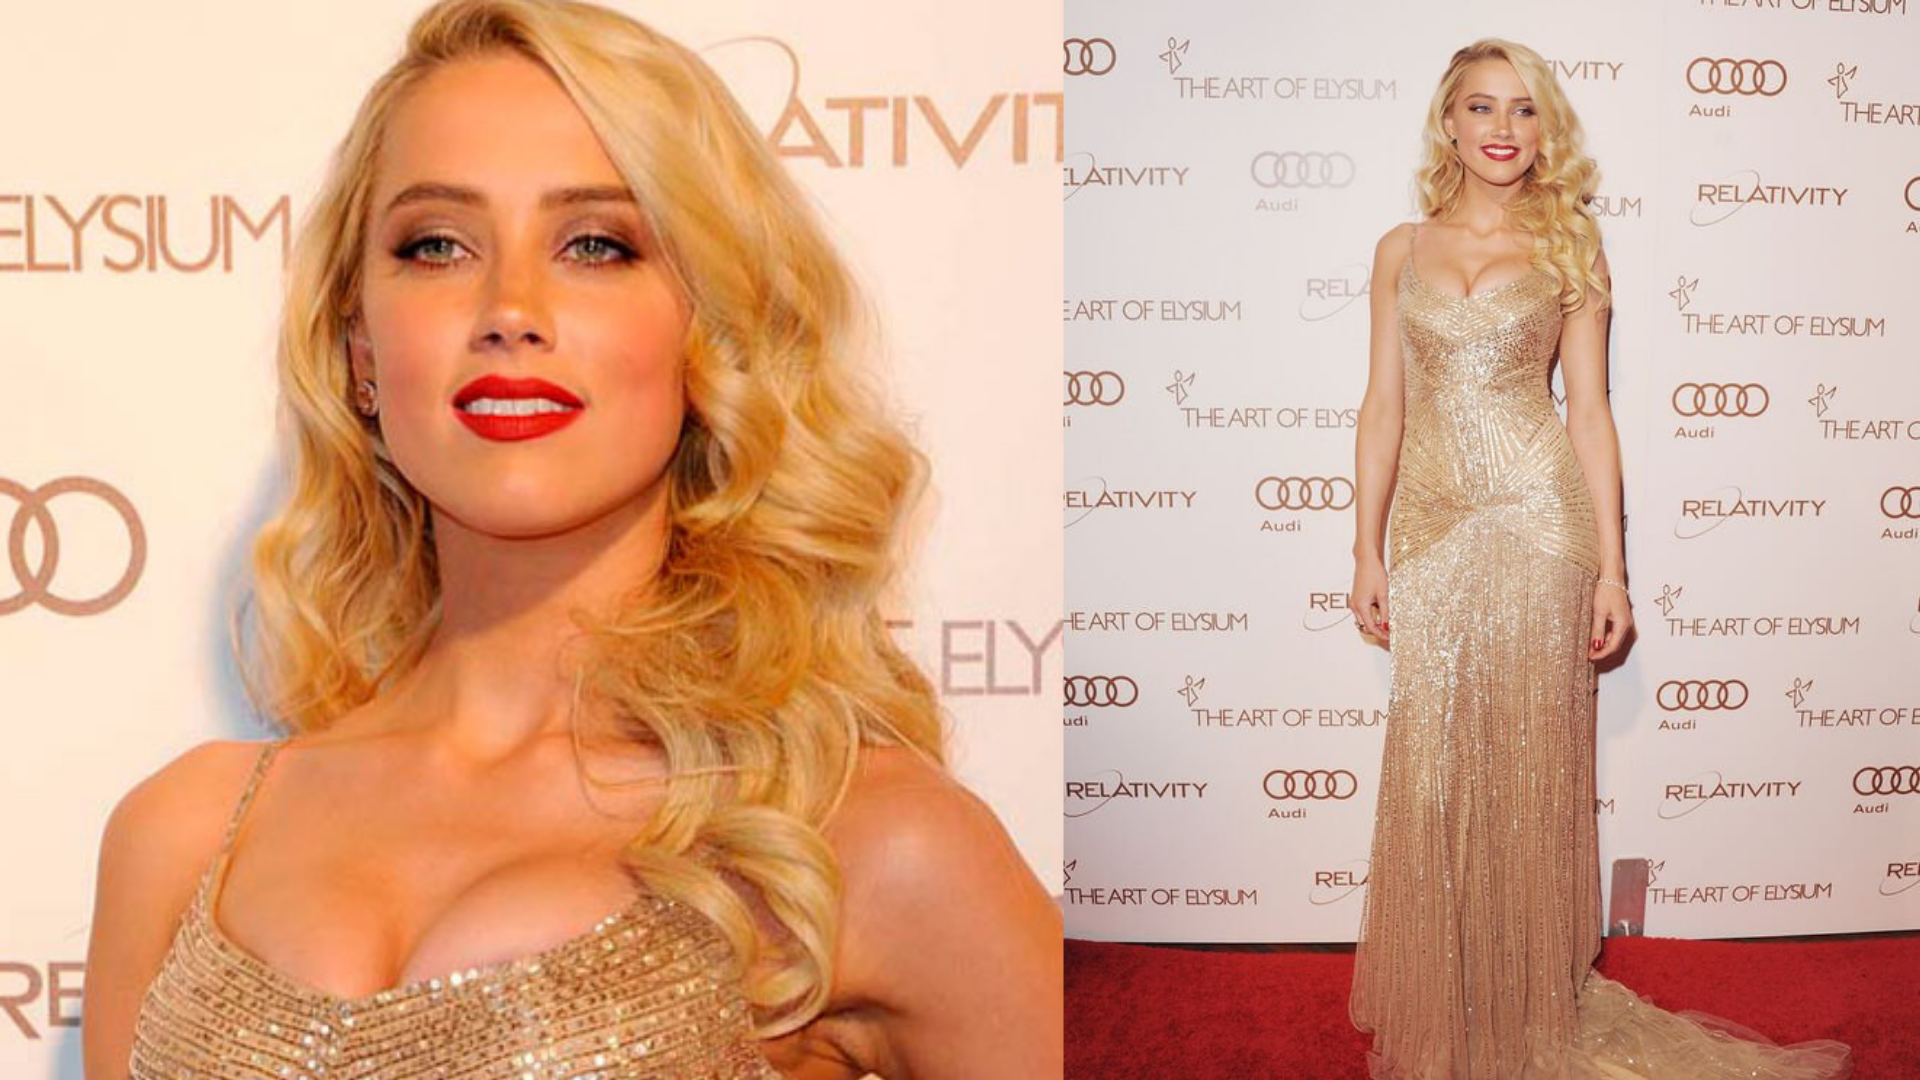 Amber Heard wearing shimmering gown in a Charity Event